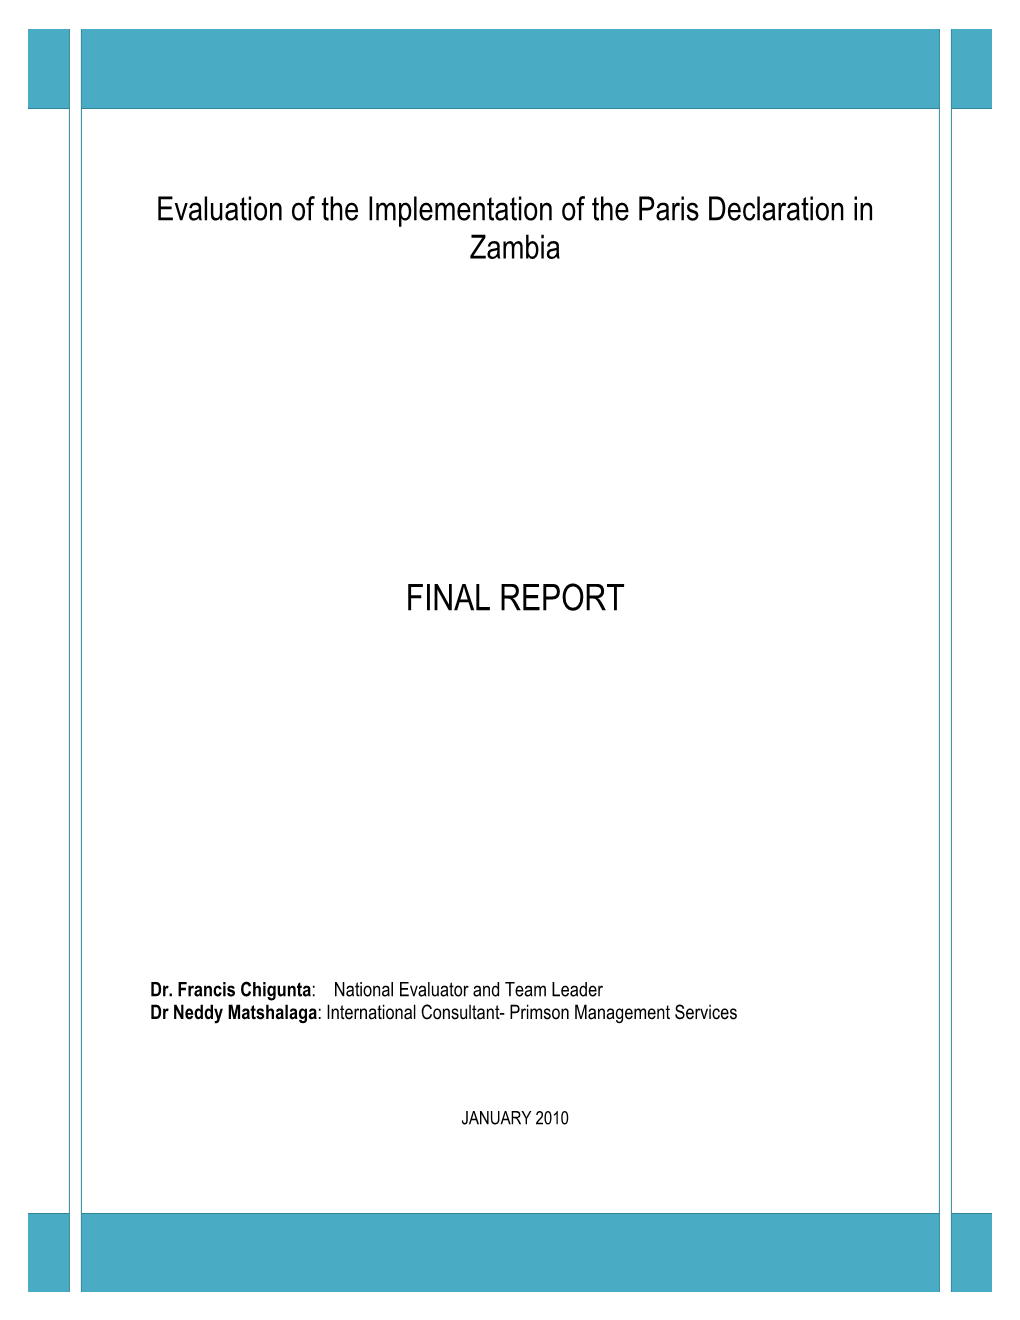 Evaluation of the Implementation of the Paris Declaration in Zambia